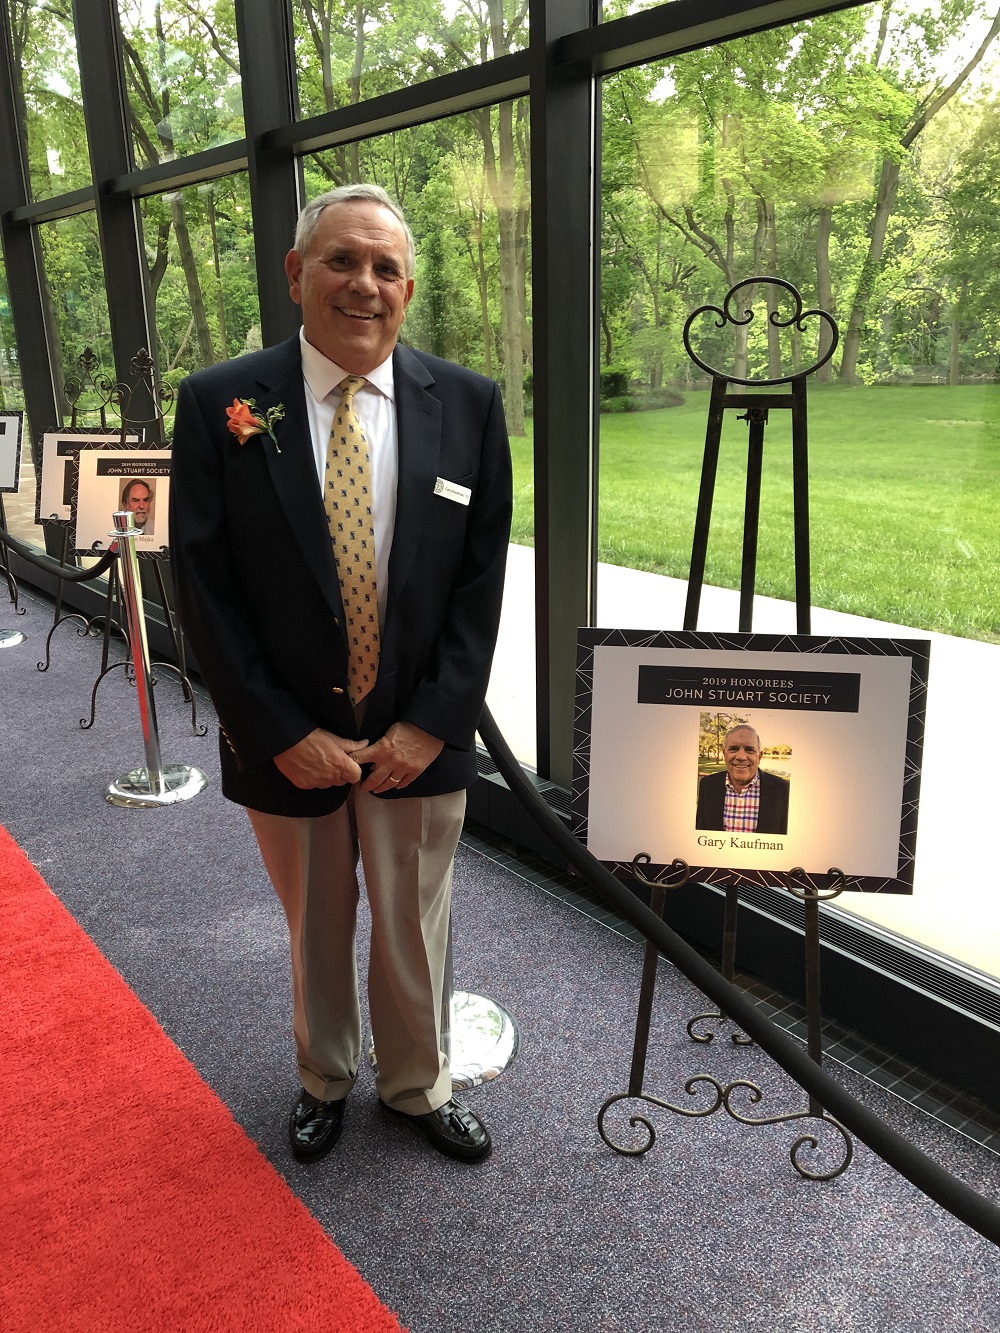 Gary Kaufman stands next to his John Stuart Society induction poster.